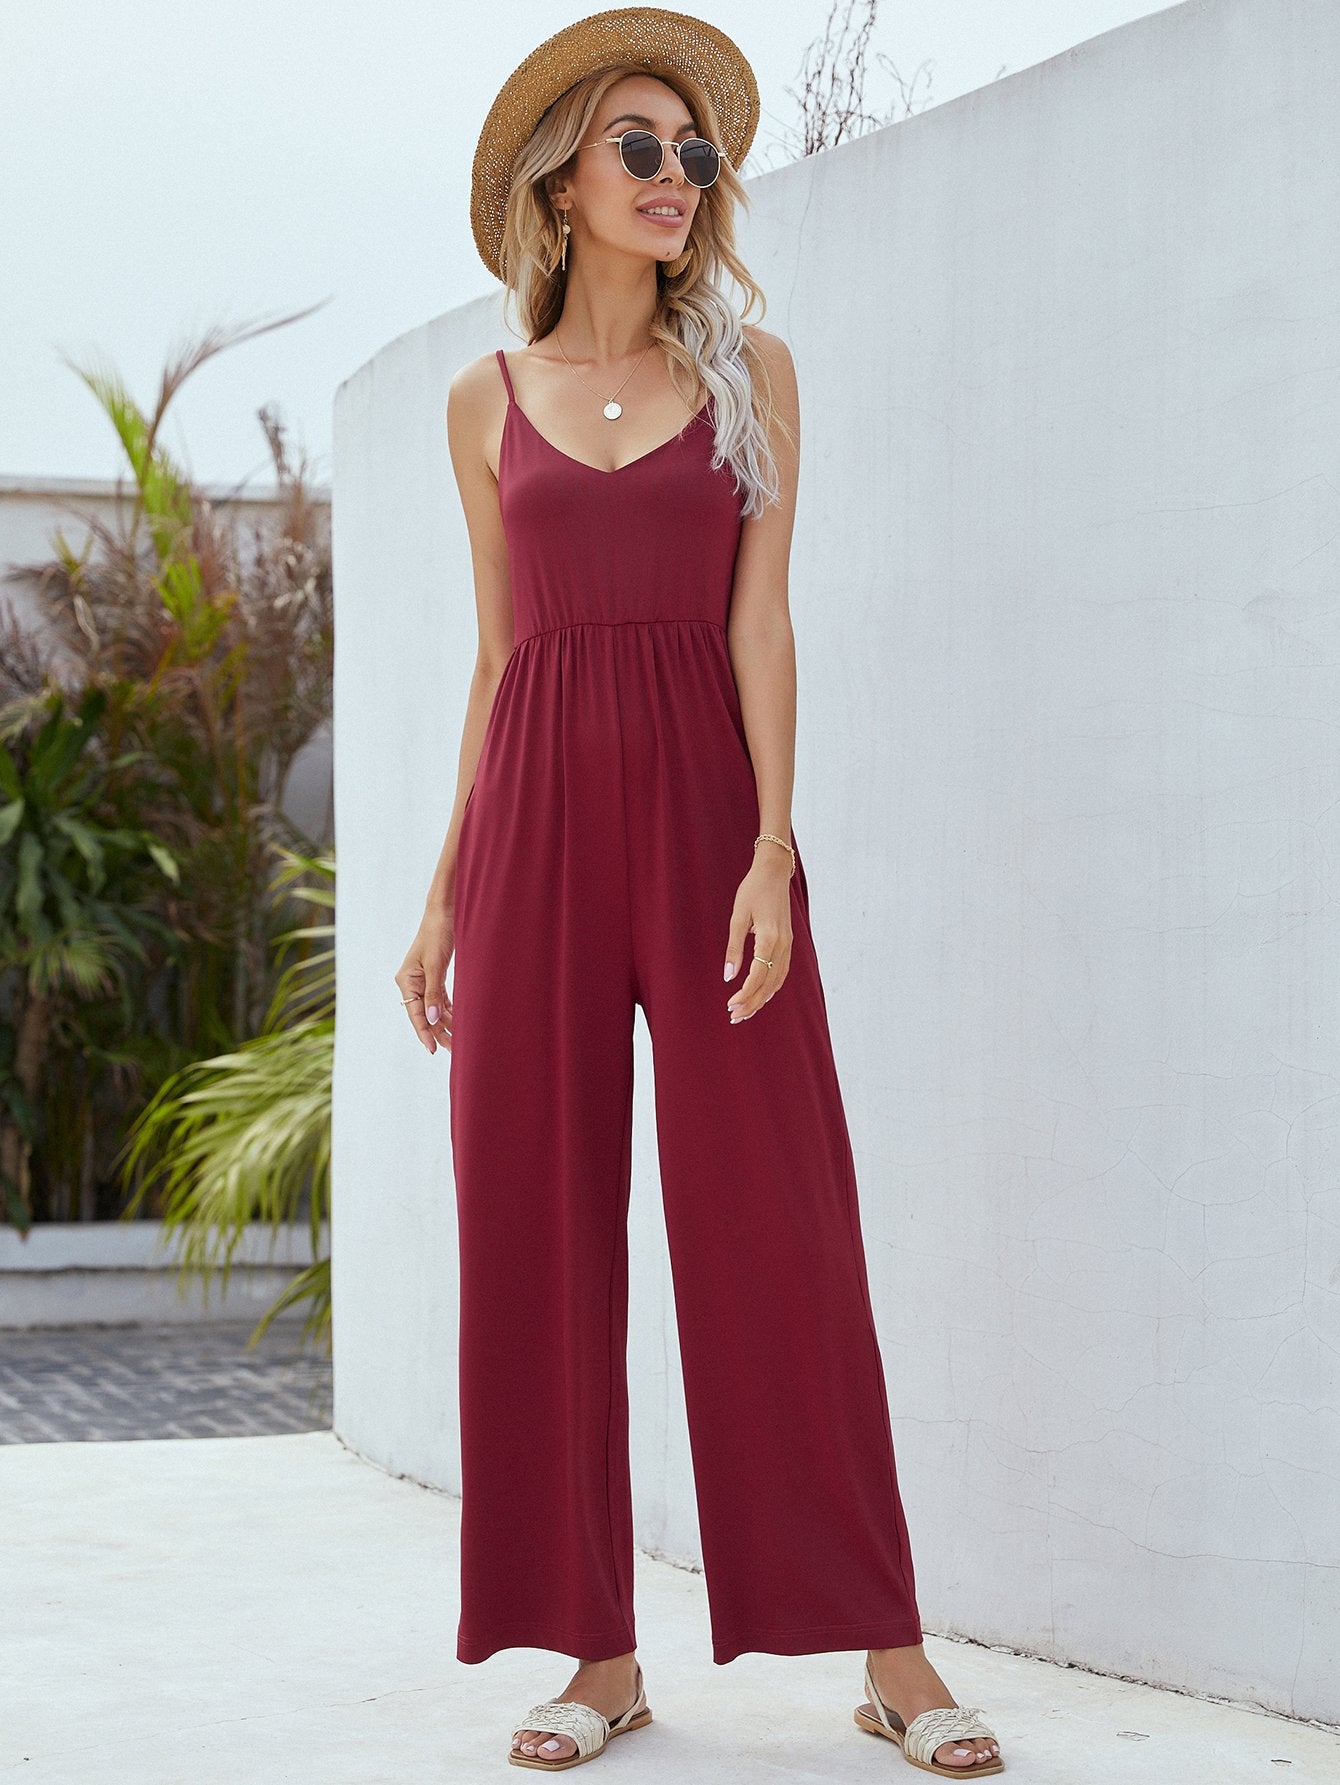 Adjustable Spaghetti Strap Jumpsuit with Pockets-TOPS / DRESSES-[Adult]-[Female]-Wine-S-Blue Zone Planet